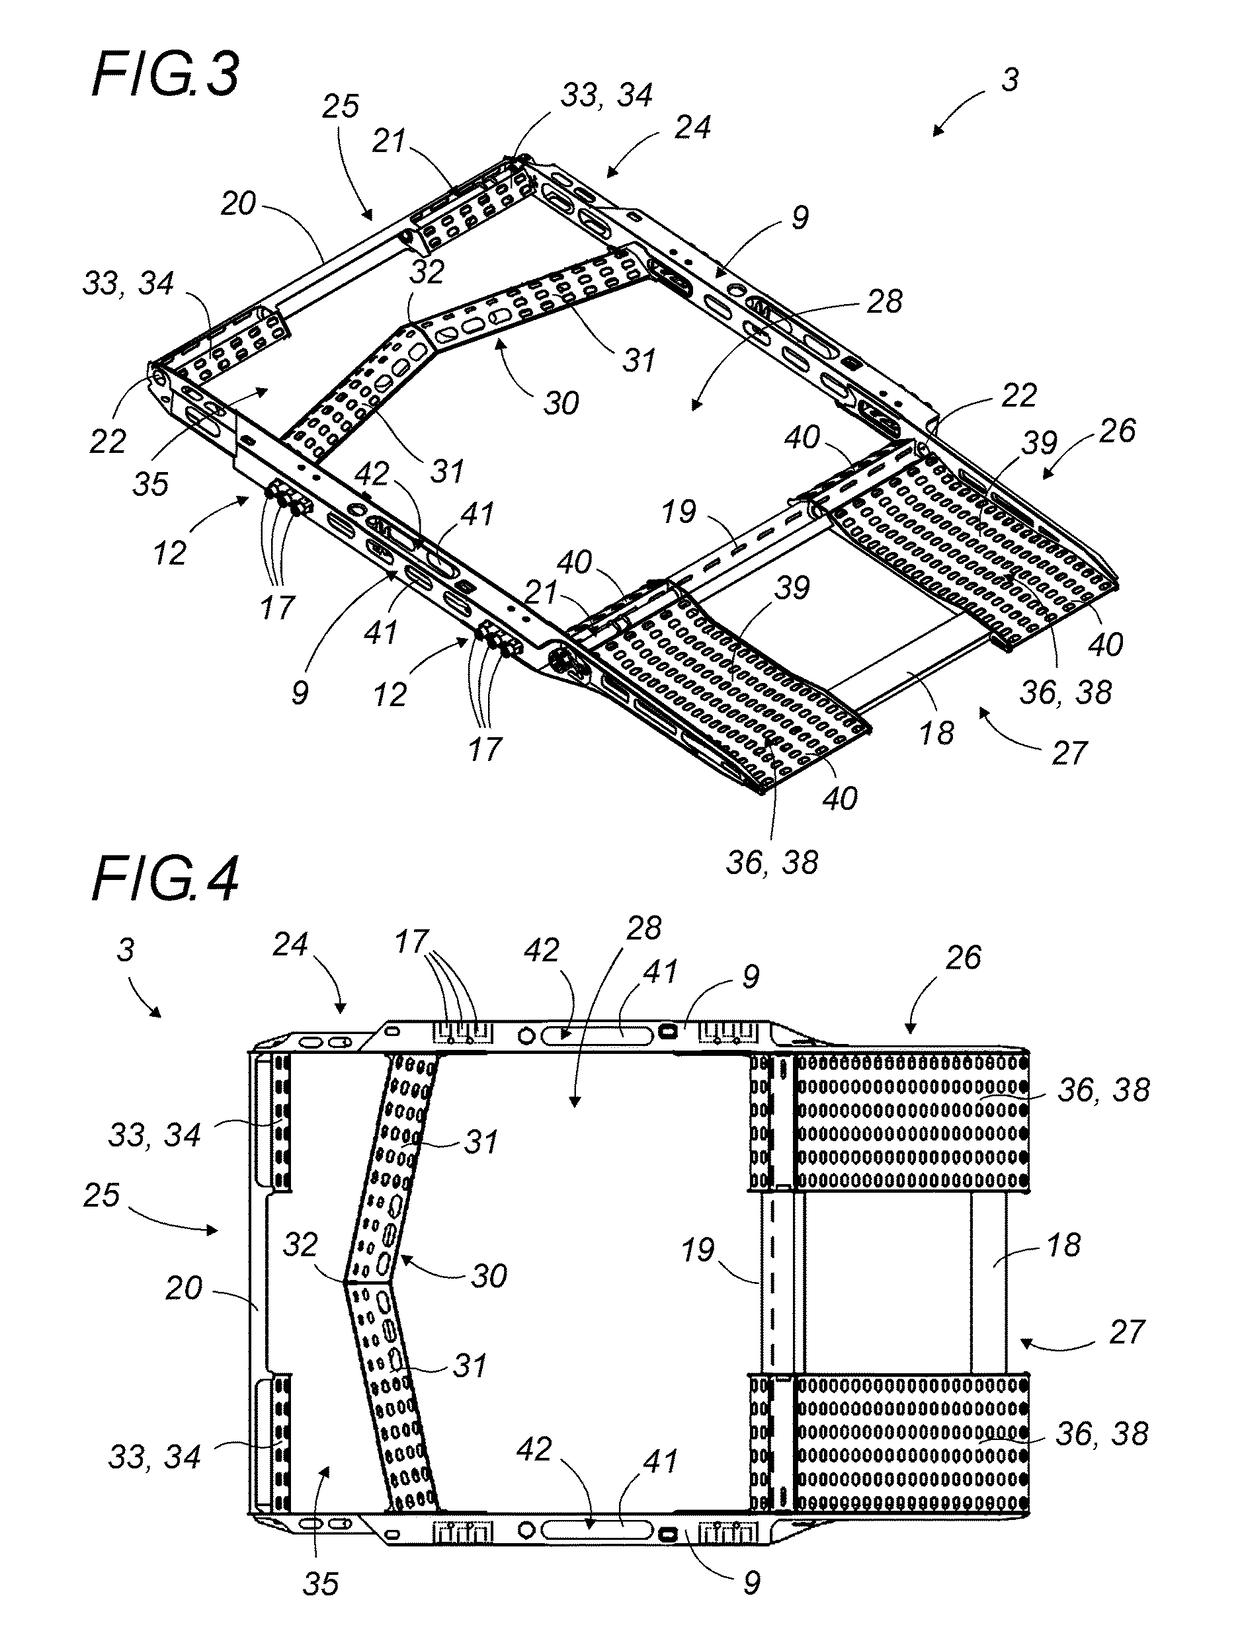 Individual, universal, removable, load-bearing pallet for car-carrying vehicle